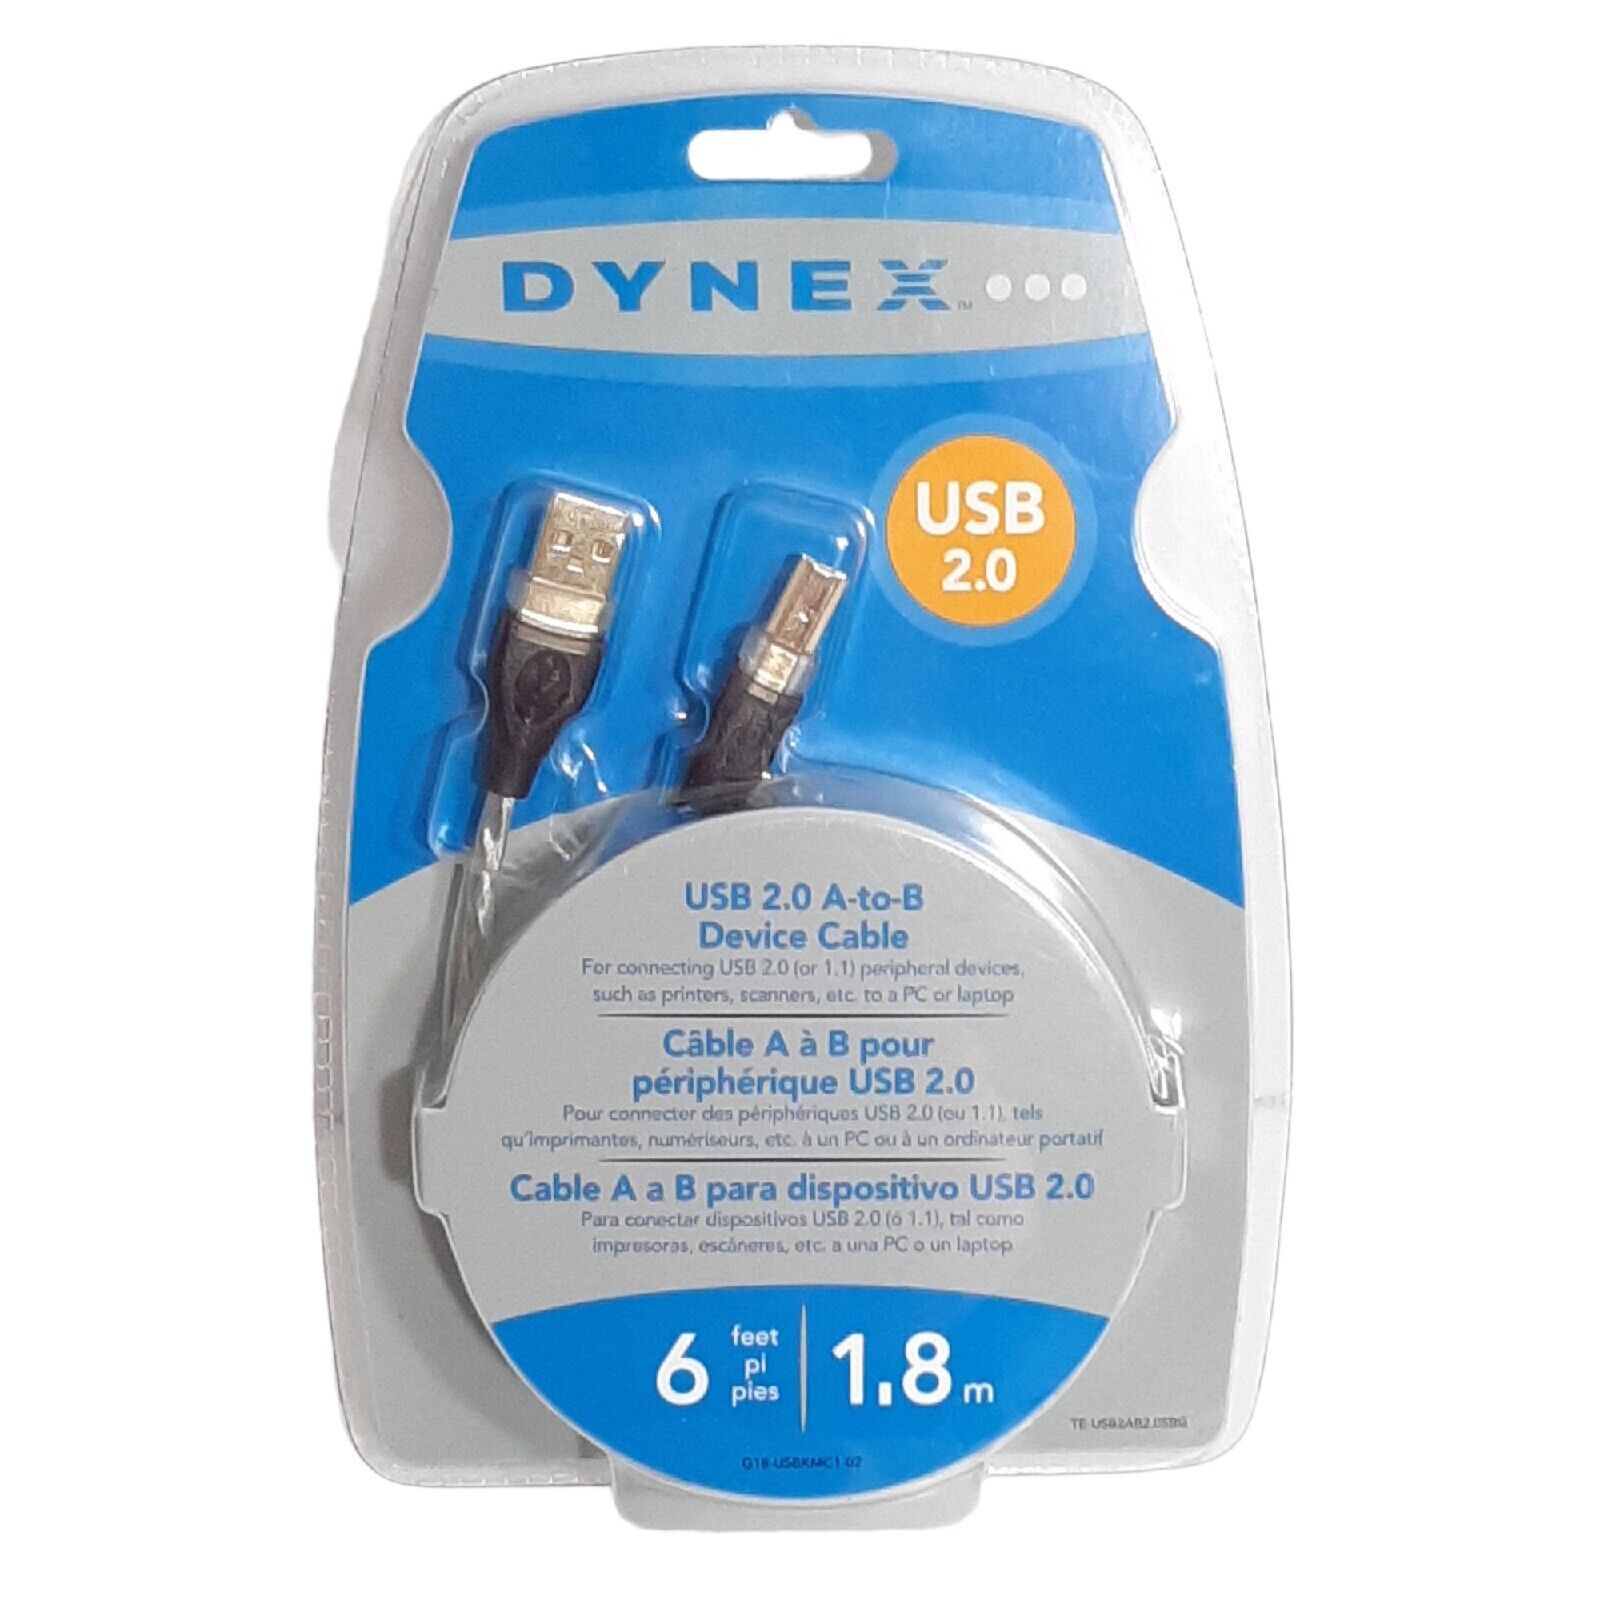 Dynex USB 2.0 Device Cable A Male to B Male Gold Plated Connectors 6'/1.8 M